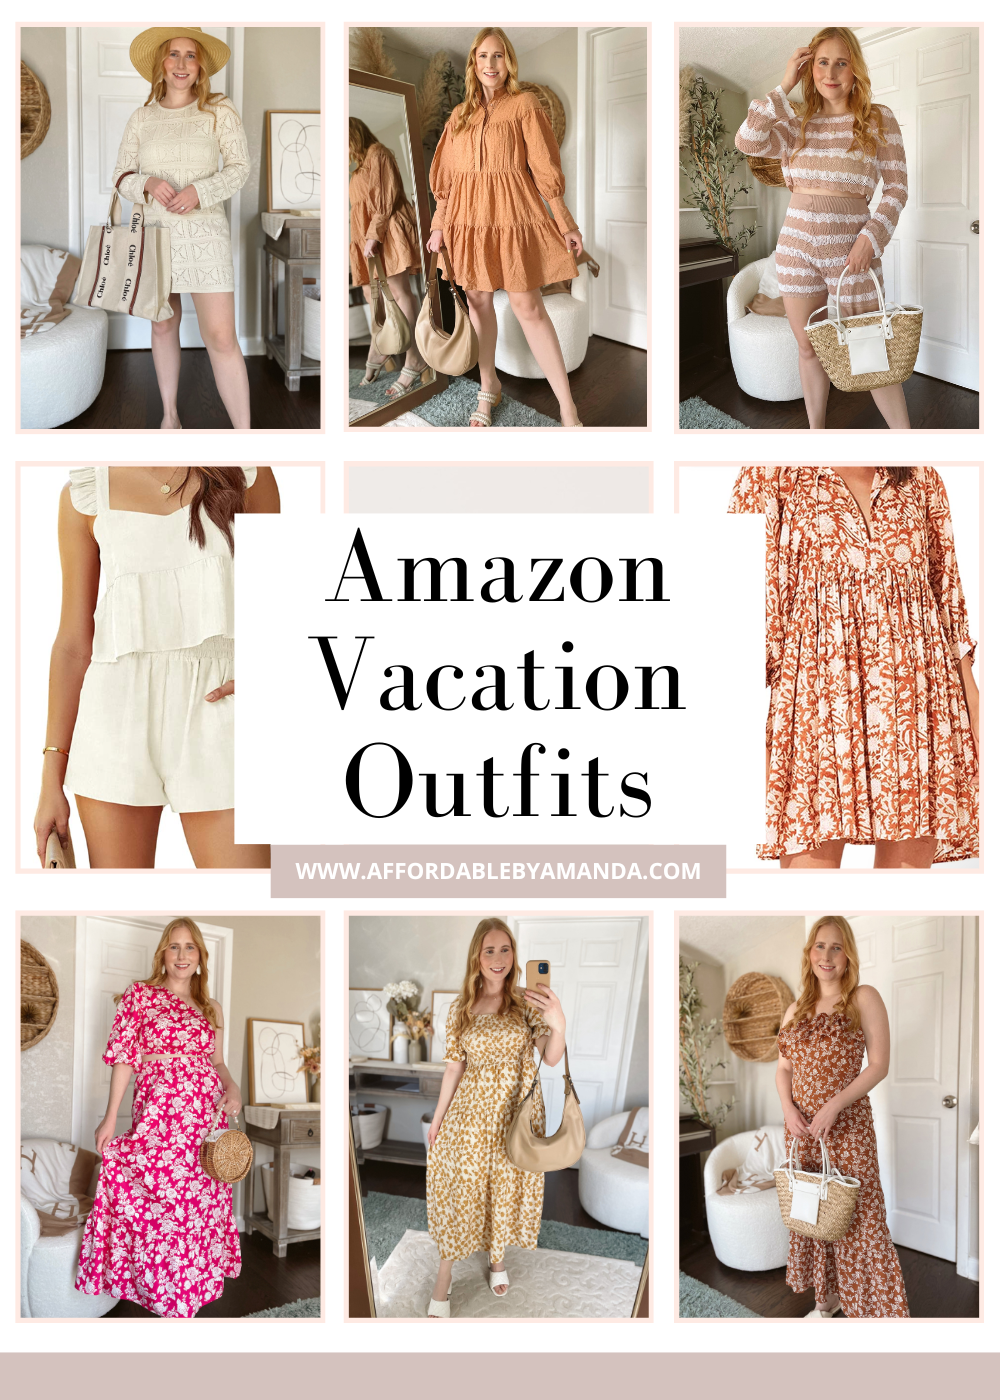 Amazon Vacation Outfits - Affordable by Amanda